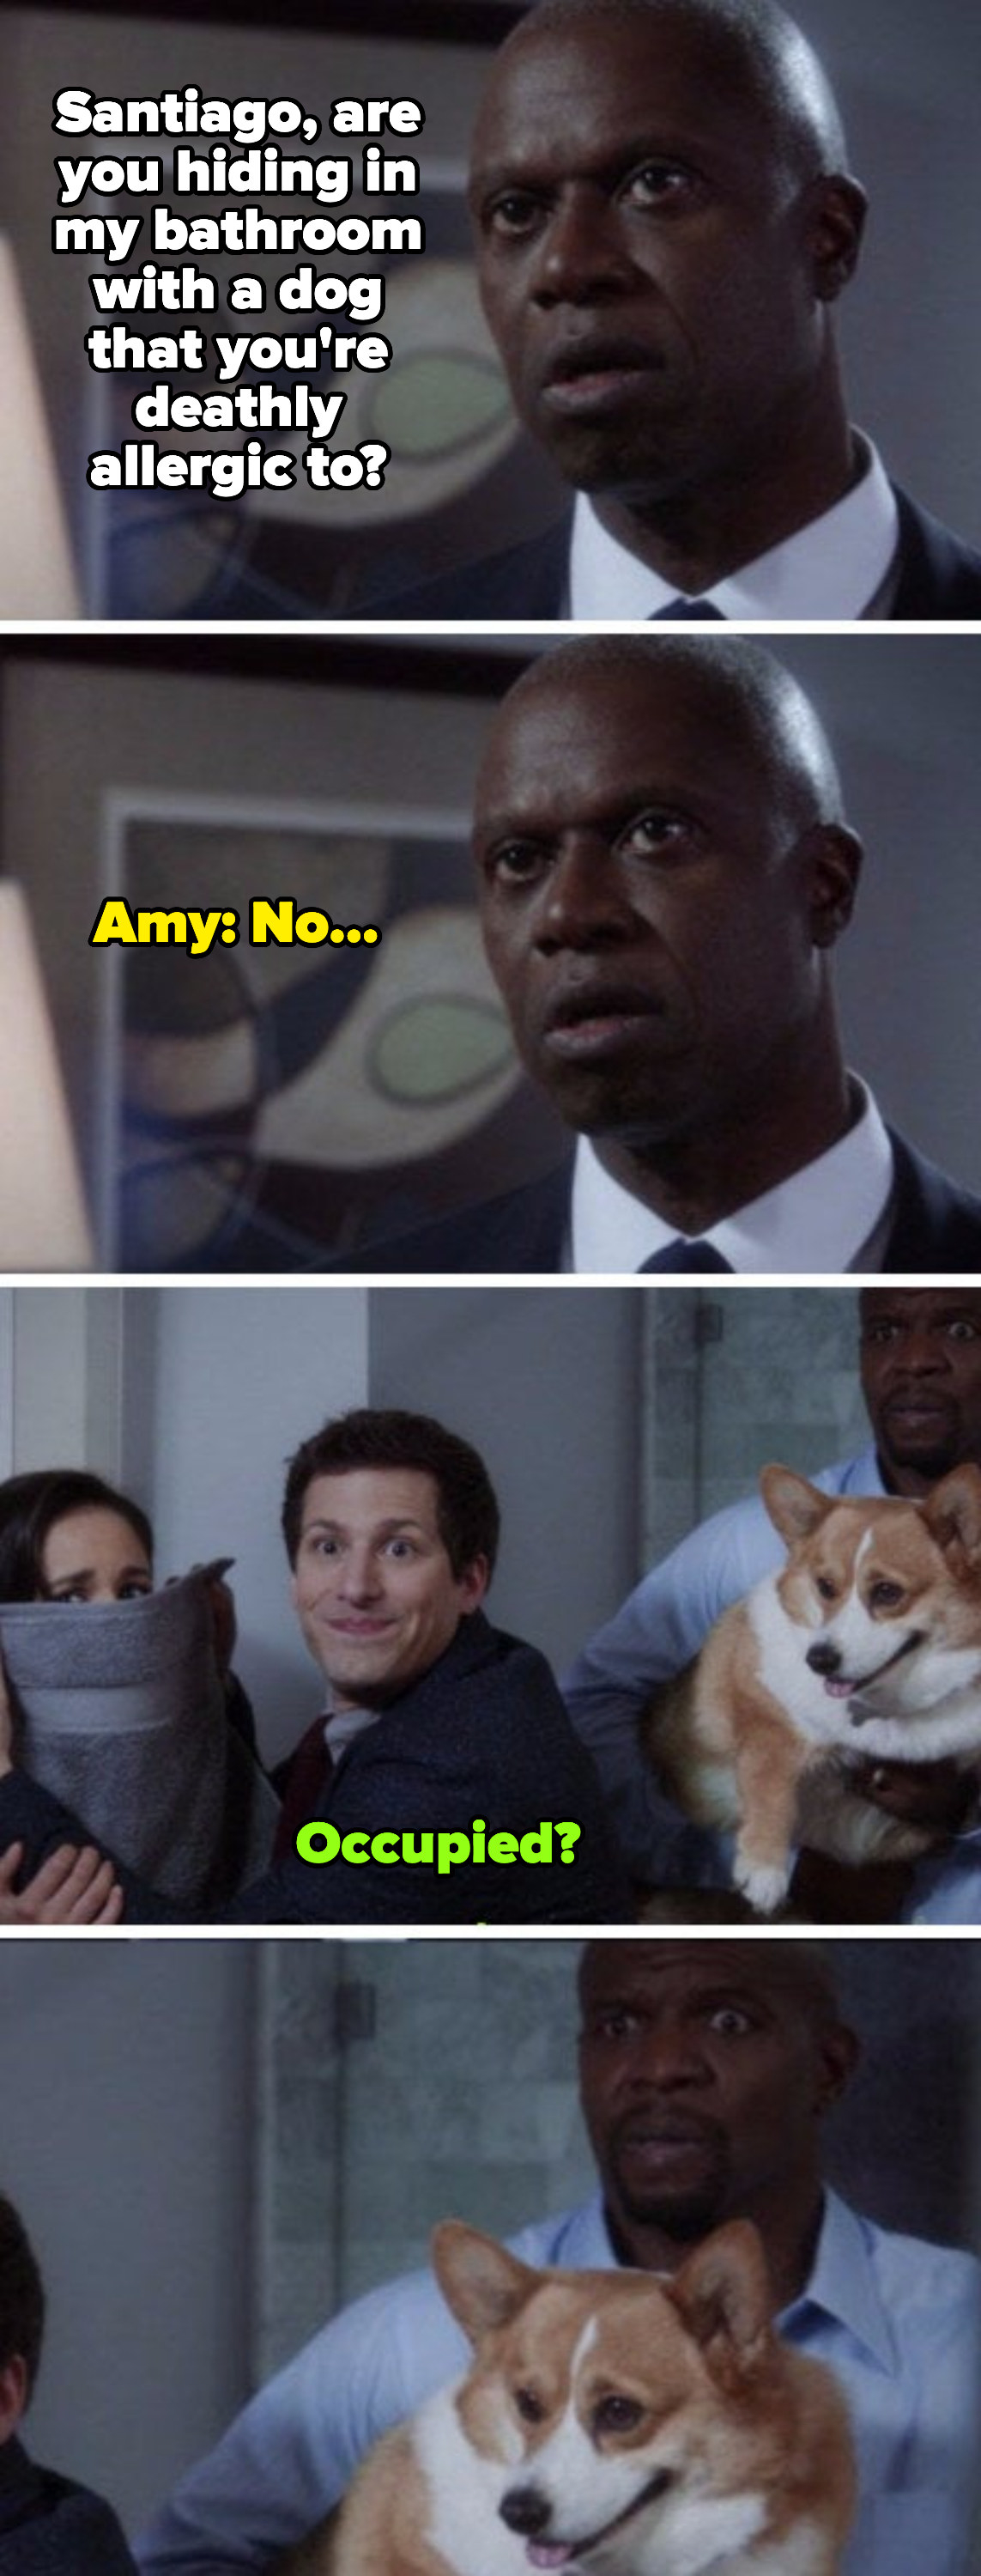 Captain Holt: &quot;Santiago, are you hiding in my bathroom with a dog that you&#x27;re deathly allergic to?&quot; Amy: &quot;No...&quot;